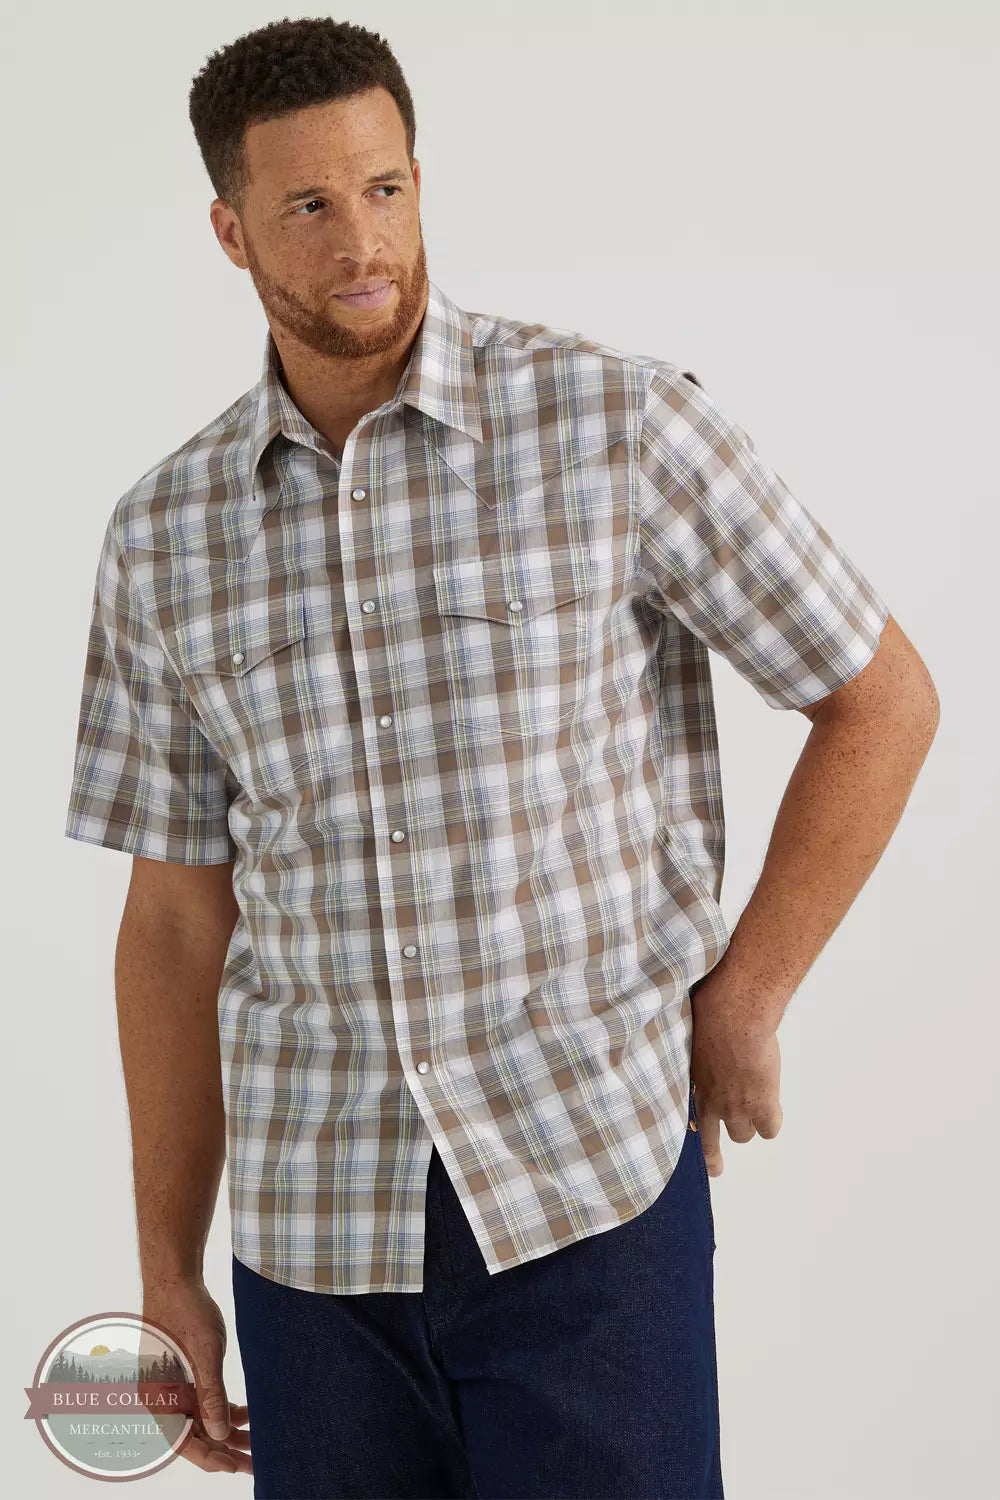 Wrangler 112344412 Wrinkle Resistant Snap Shirt in Greige Plaid Front View